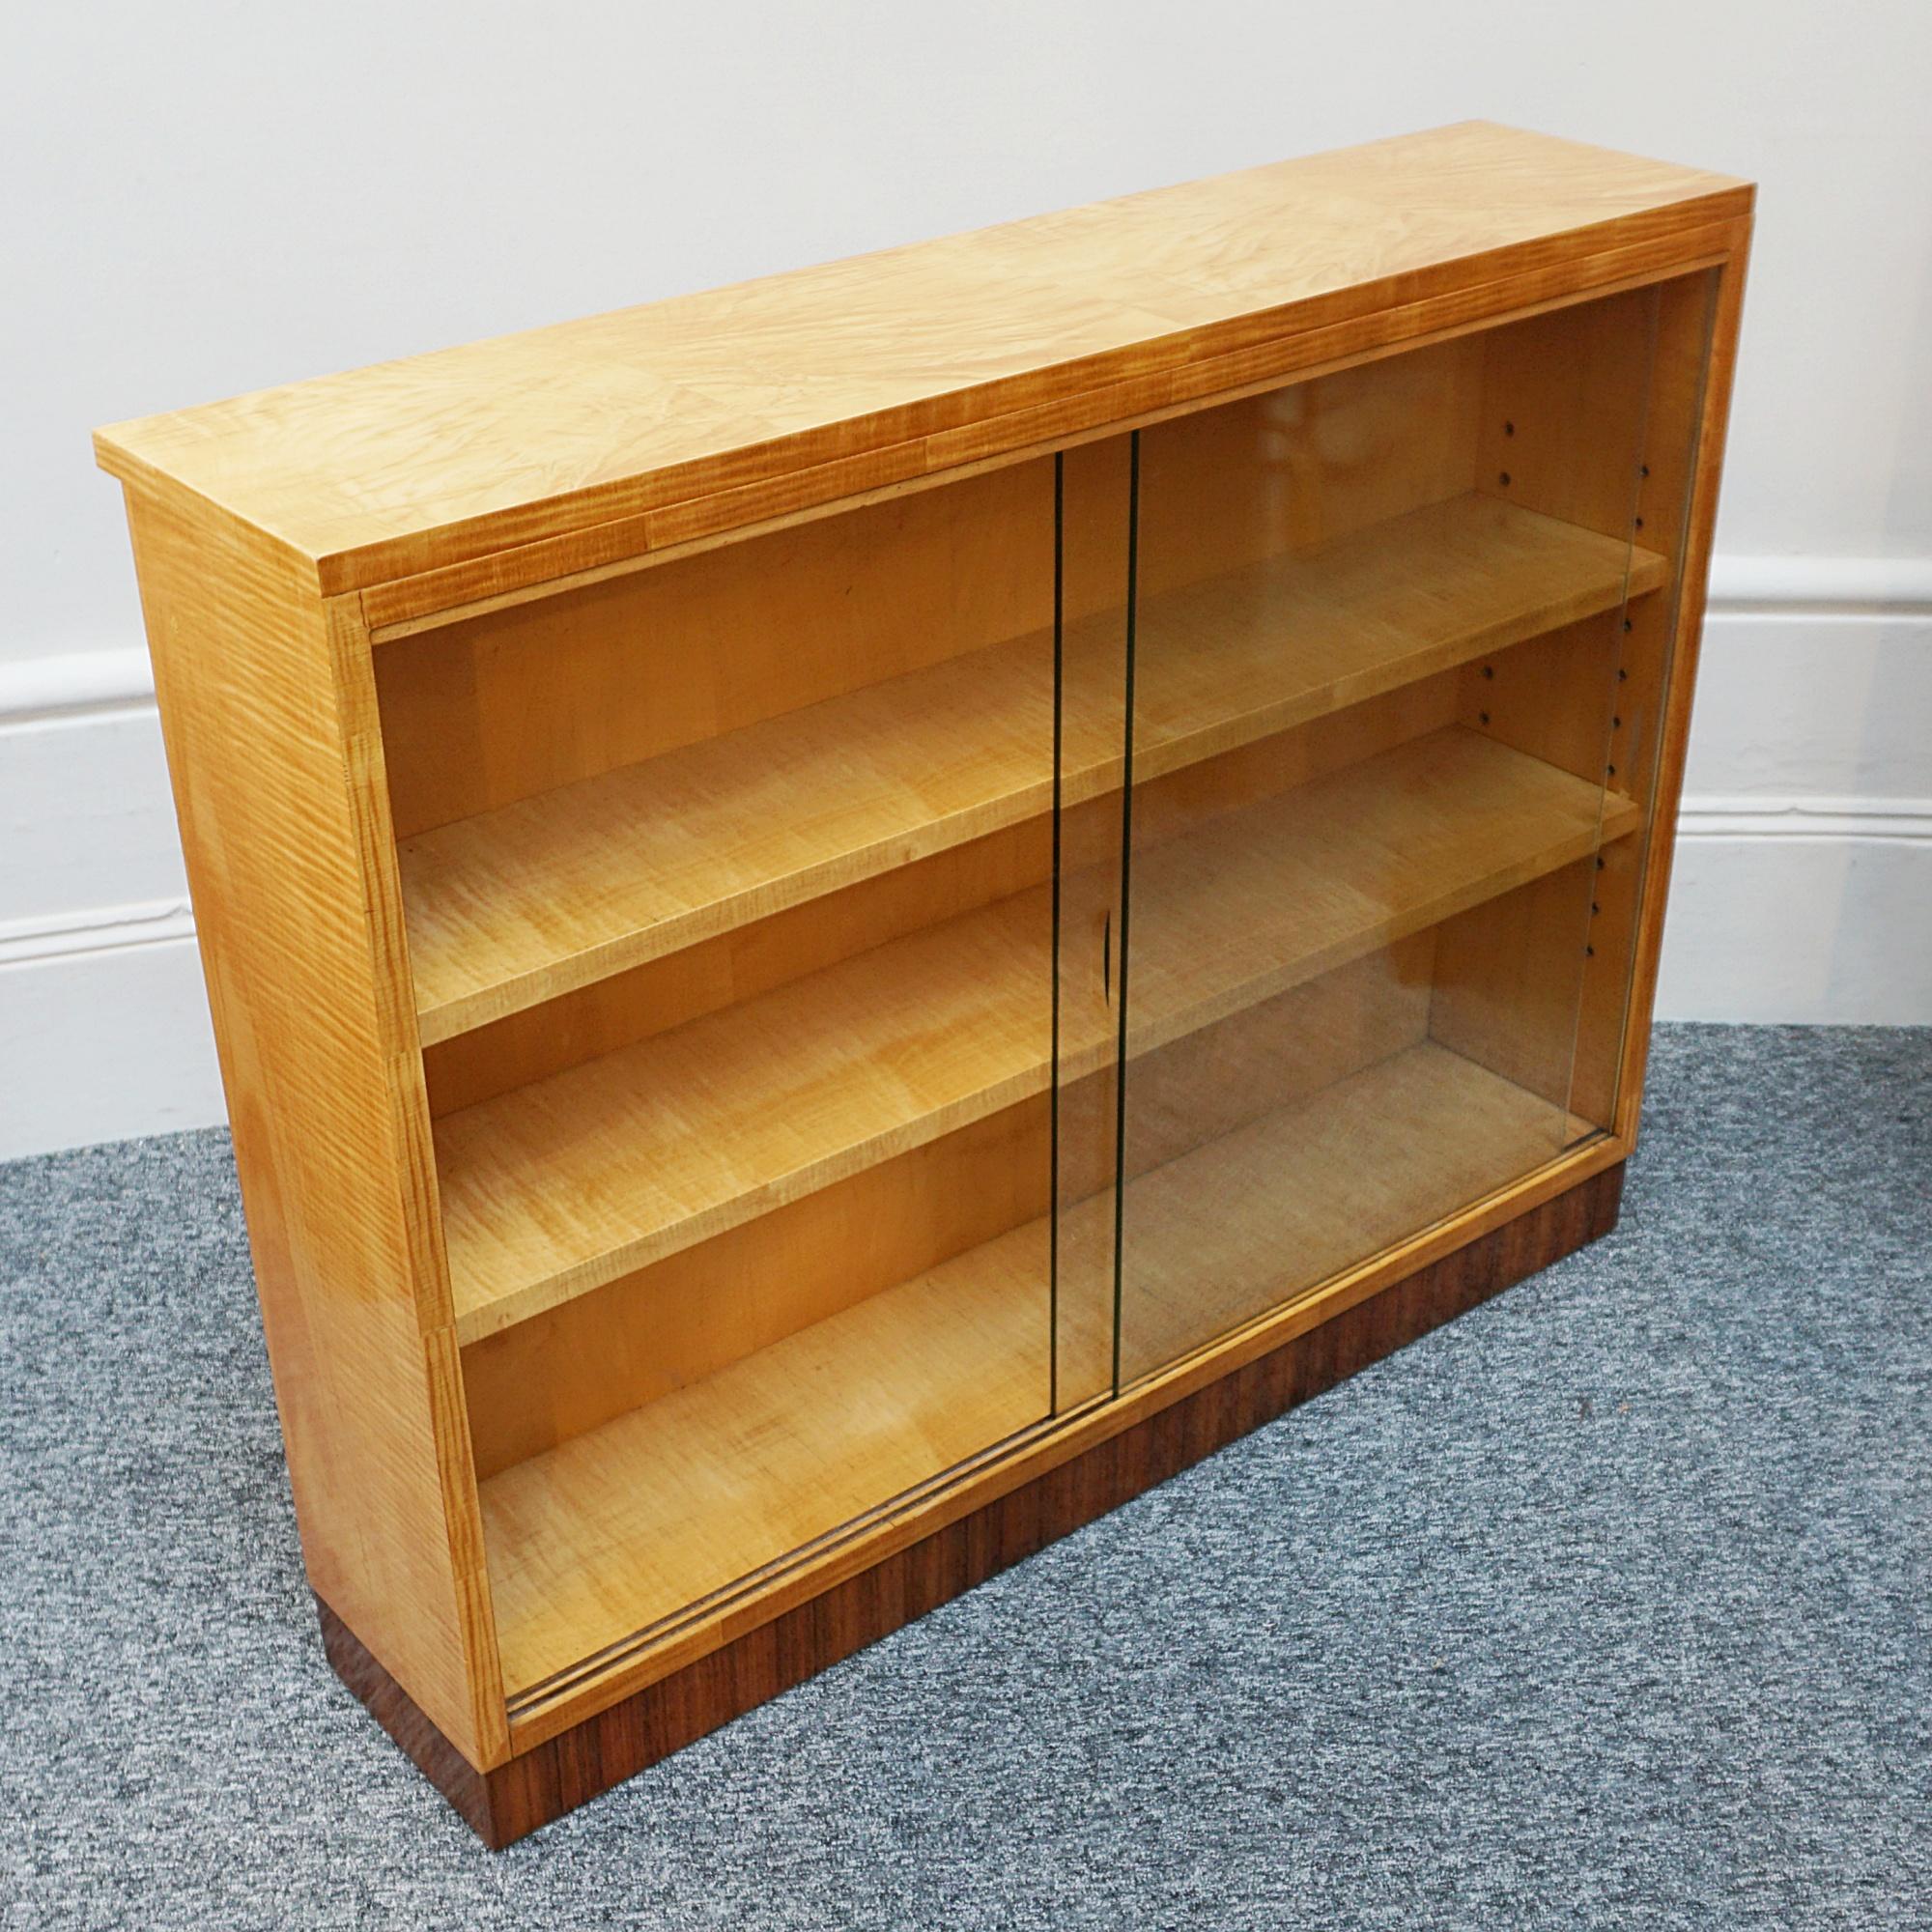 Early 20th Century Art Deco Satin Birch Veneered Bookcase by Heal's of London 